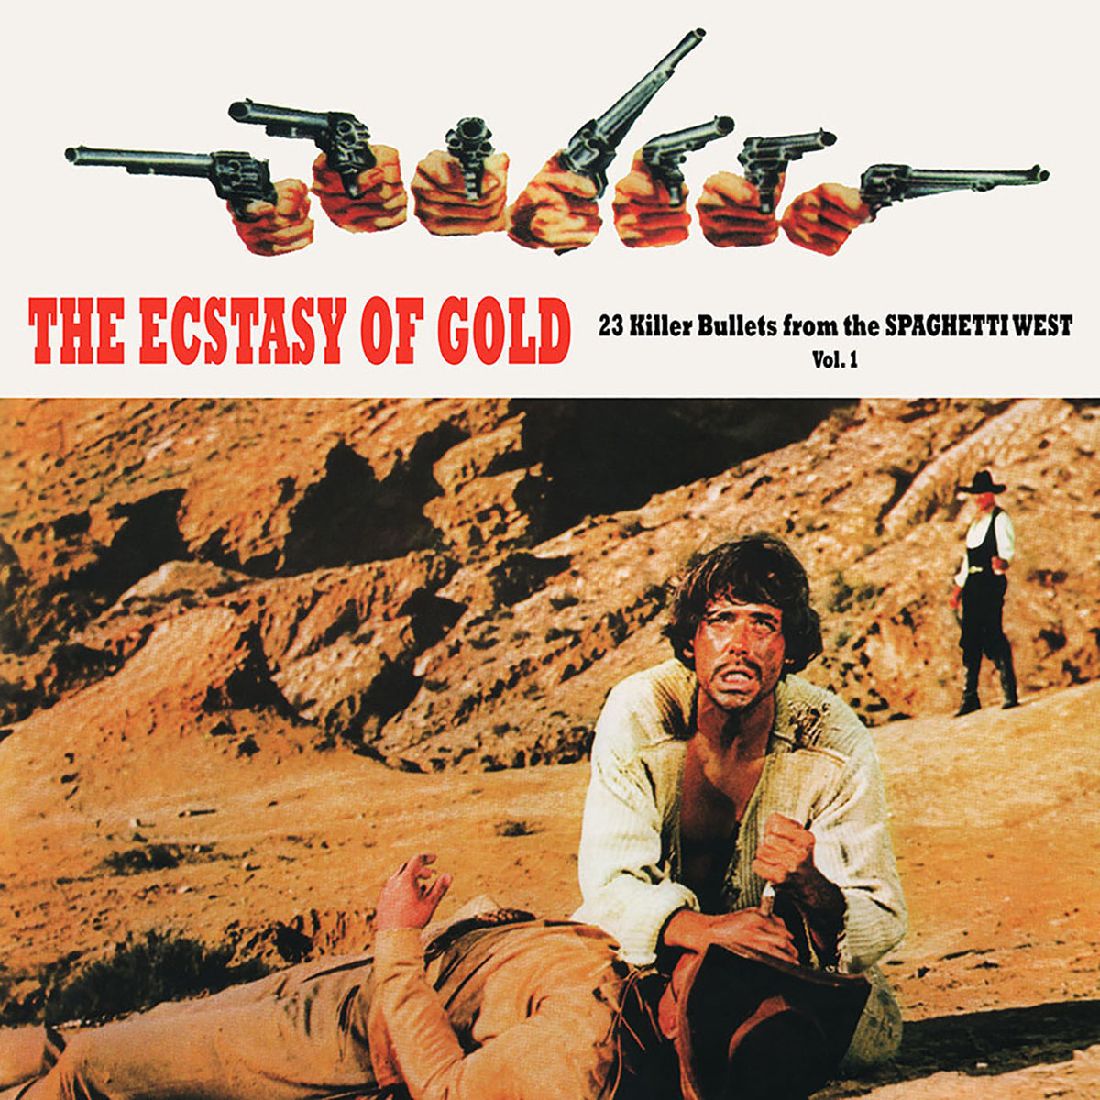 V.A. / THE ECSTASY OF GOLD VOL. 1: 23 KILLER BULLETS FROM THE SPAGHETTI WESTSOUND